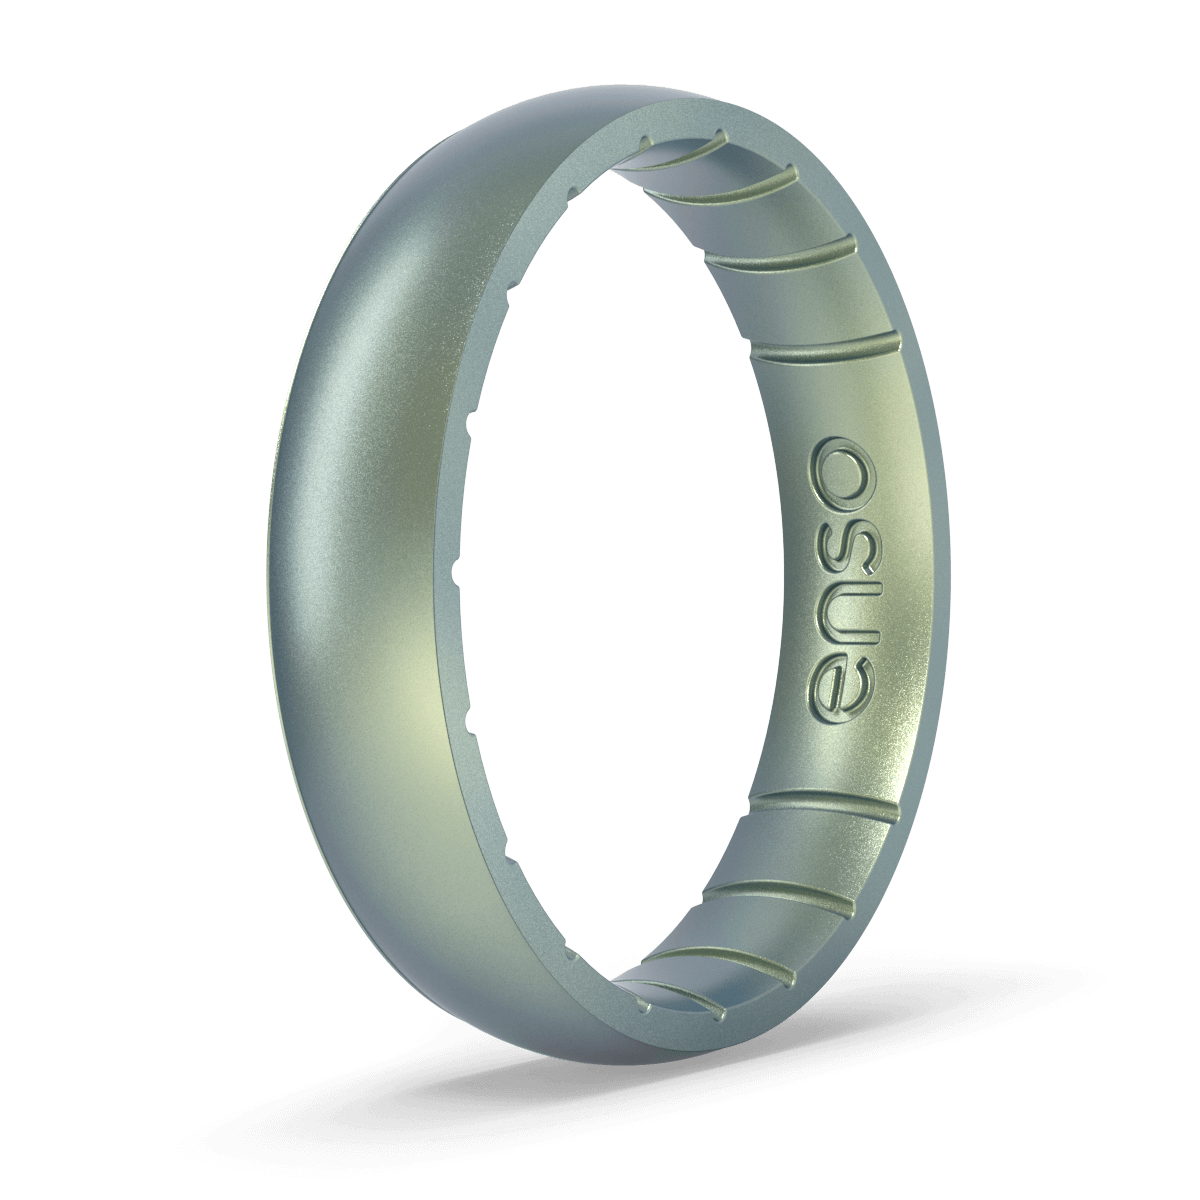 Thin Volcanic Ash Silicone Ring | Elements Collection